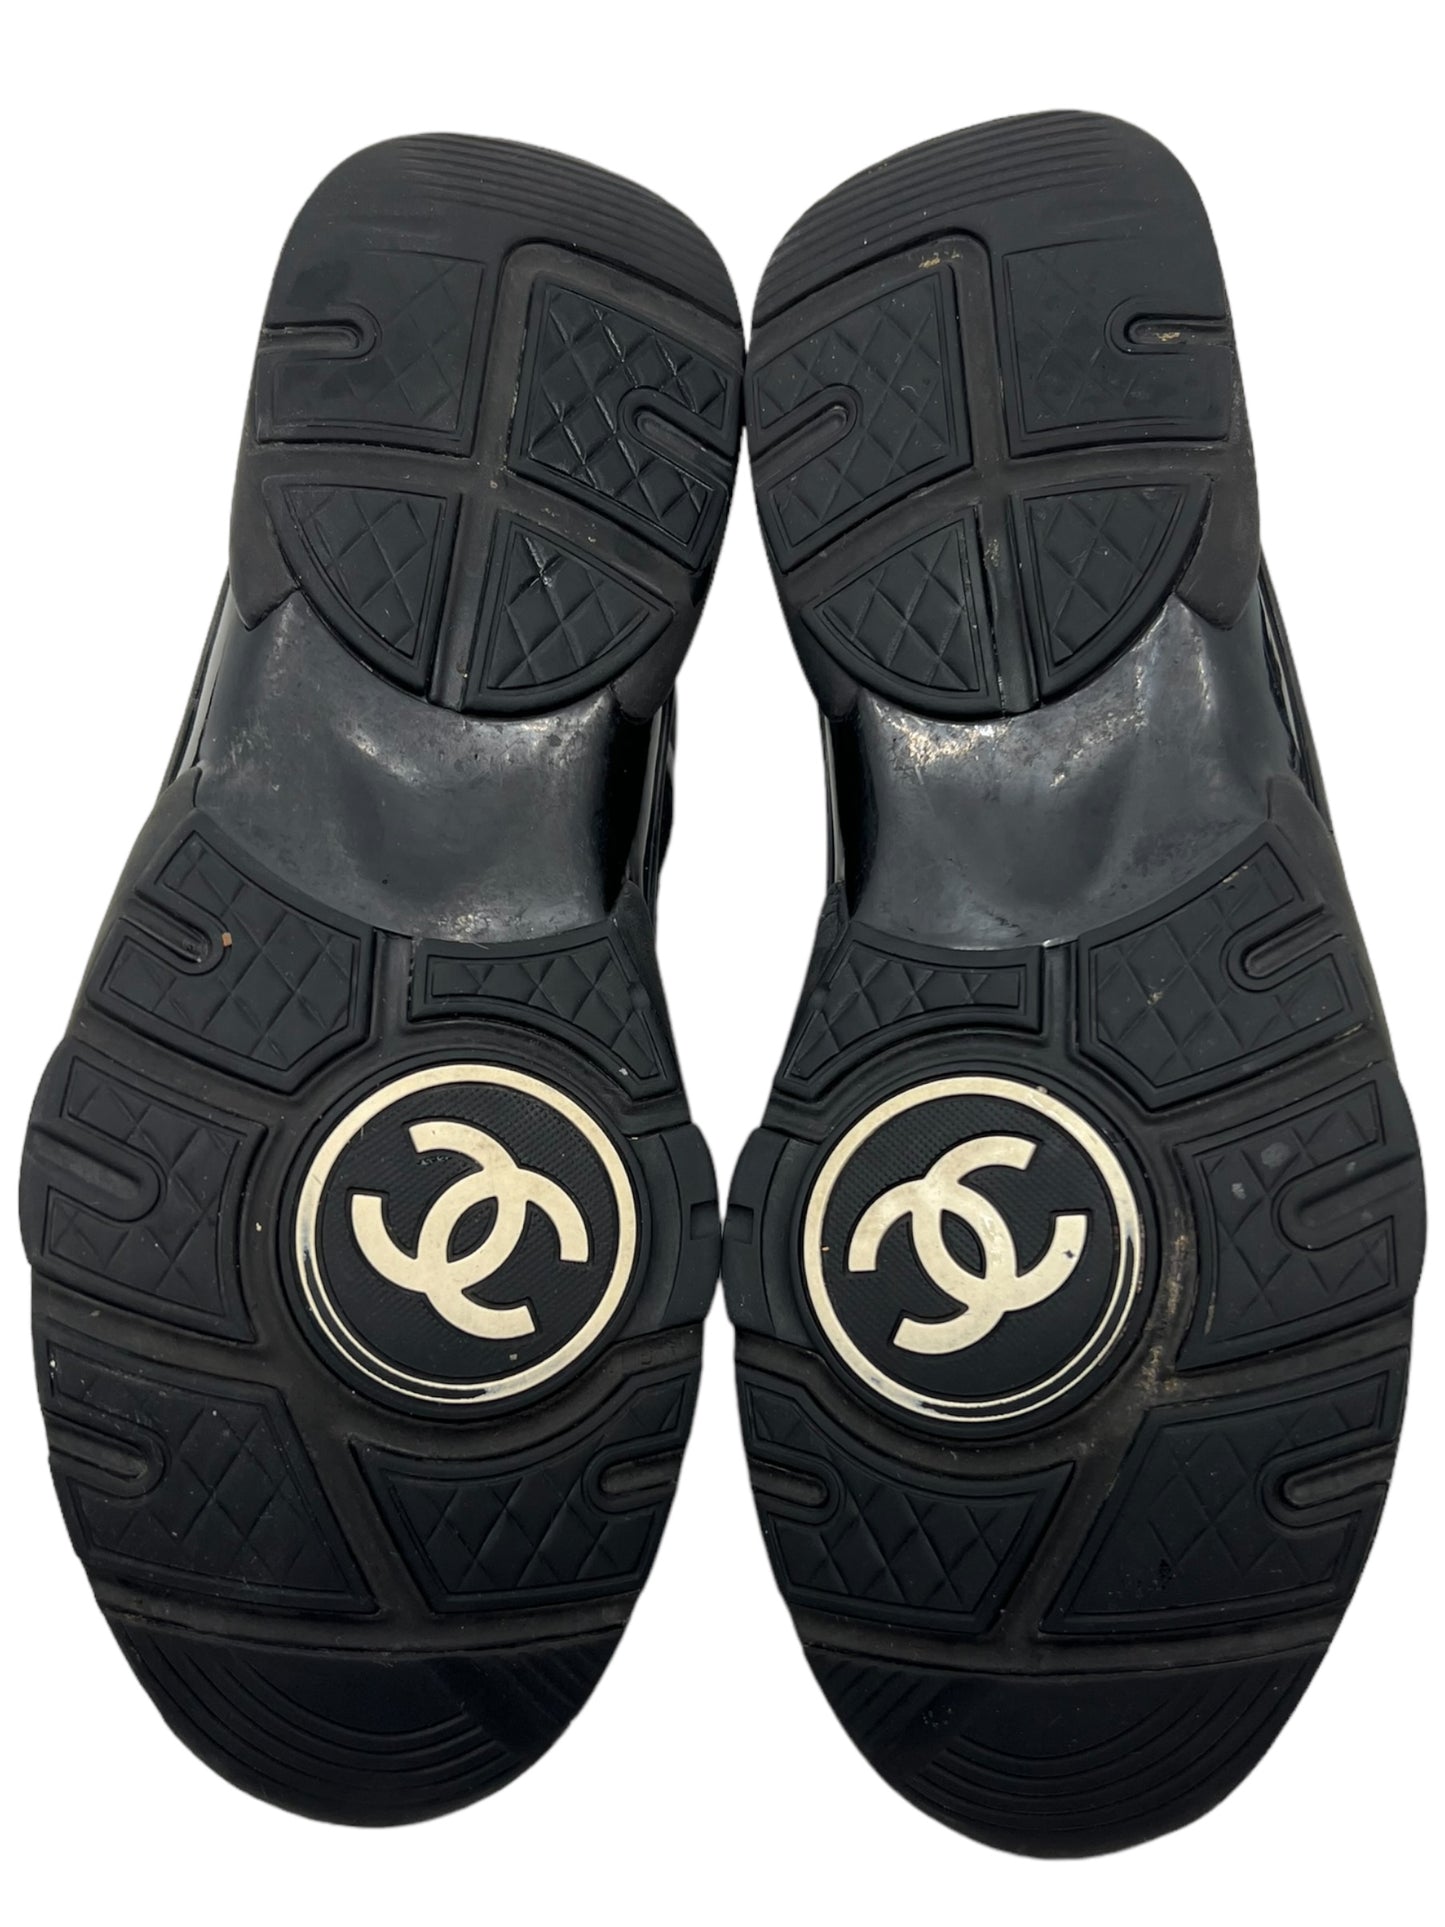 Chanel CC Trainer Black and Gold Pre-owned size 43